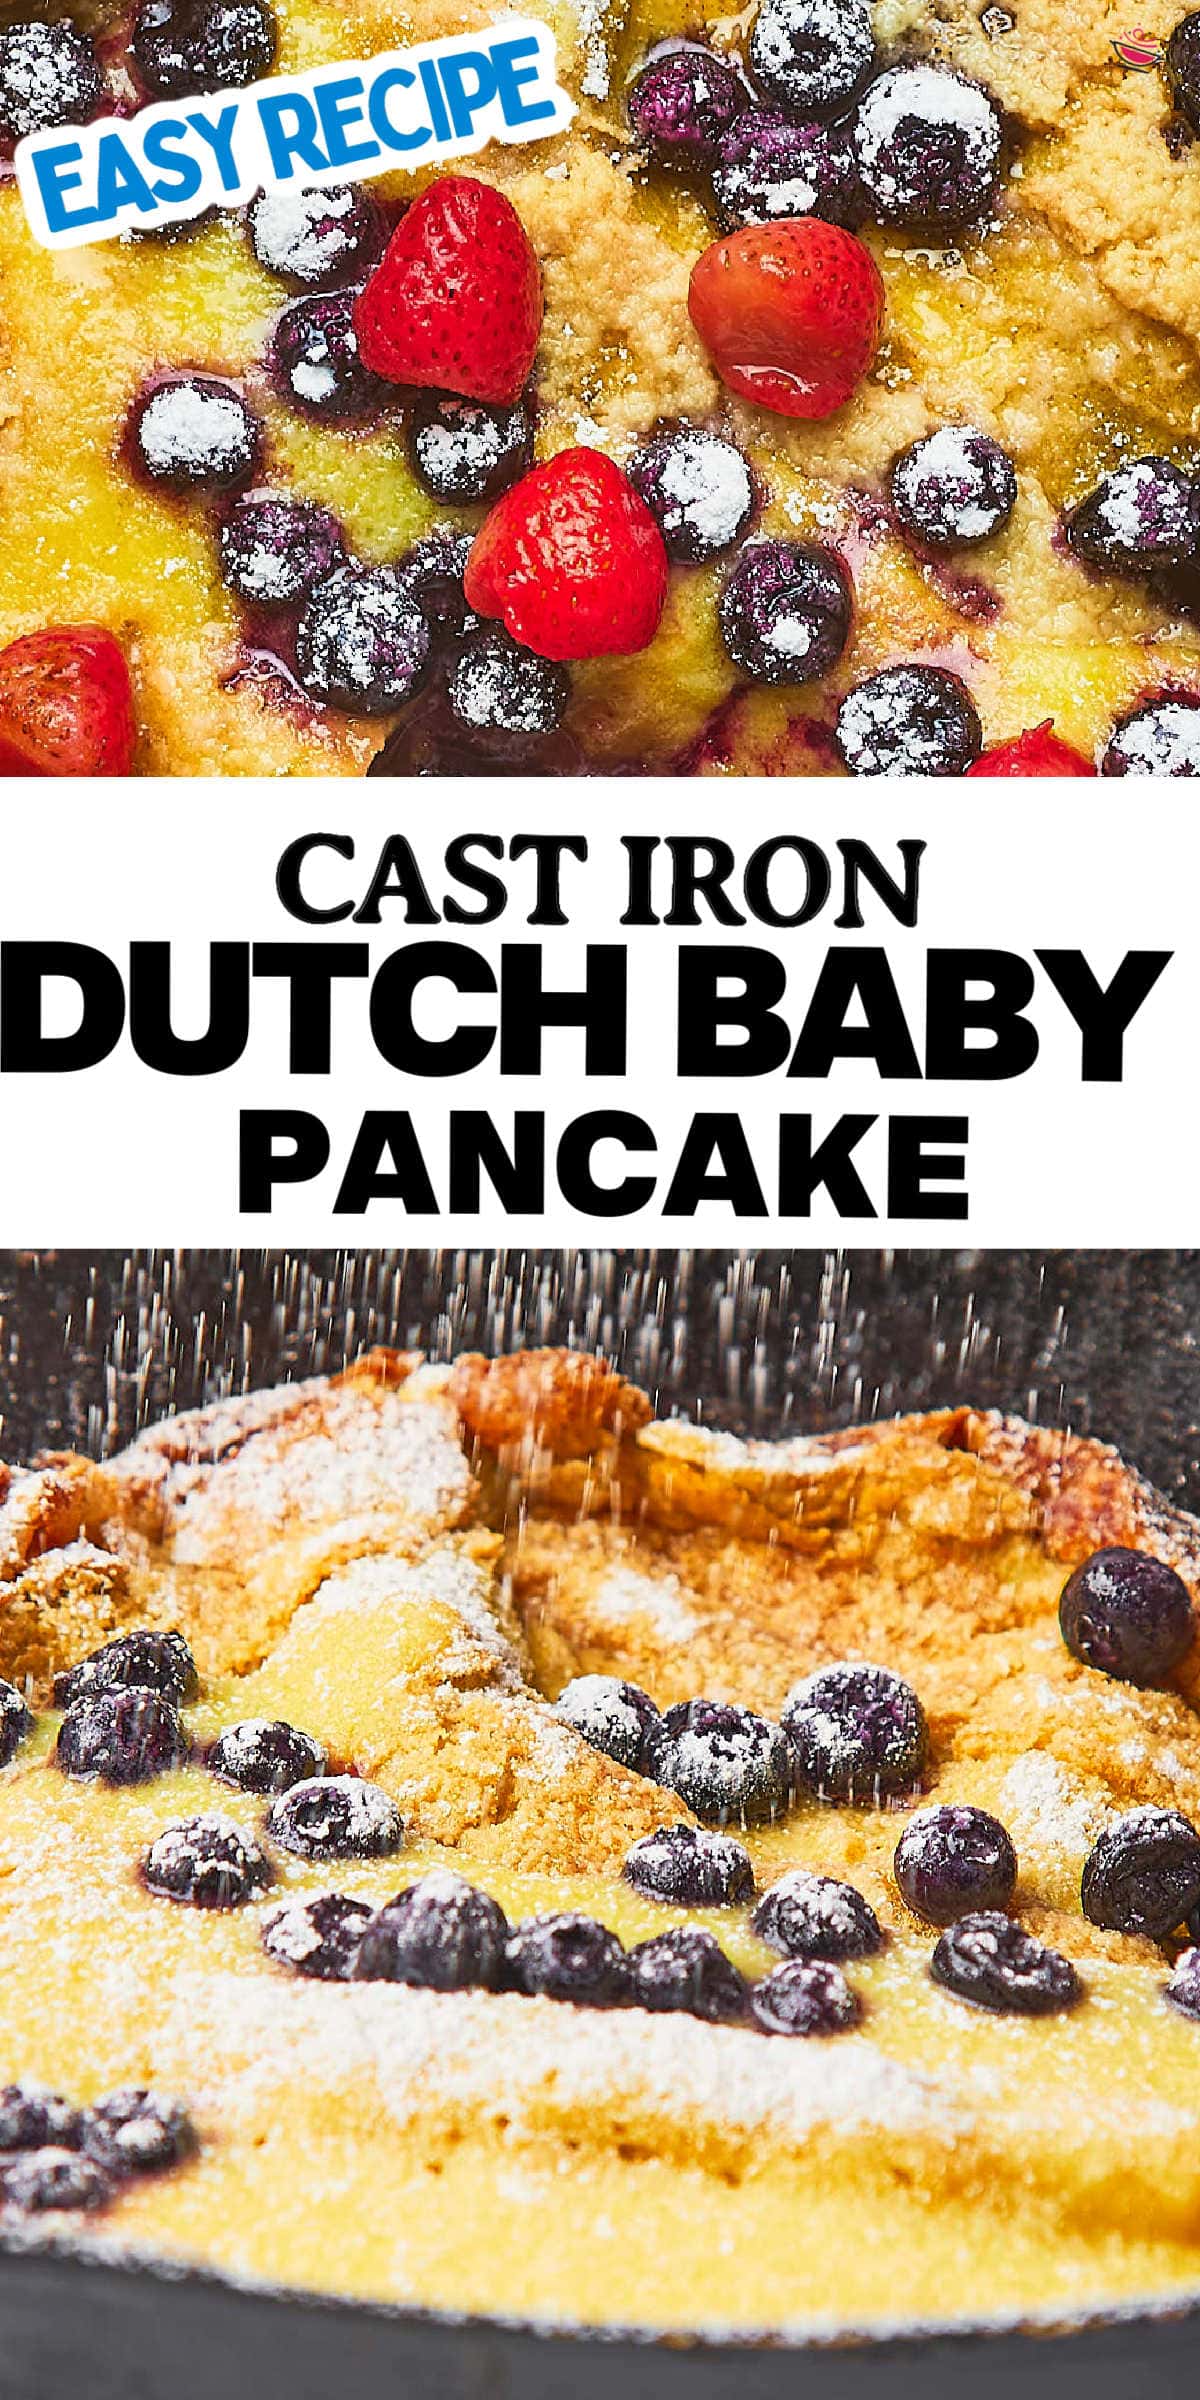 Bring warmth and smiles to your breakfast table with this incredibly fluffy Dutch Baby Pancake recipe. Watch it puff up beautifully in the oven and serve hot with a dusting of powdered sugar or a drizzle of syrup. This comfort food is sure to become a family favorite! #cheerfulcook #dutchbaby #germanpancake #EasyRecipes #PancakeRecipes #BrunchIdeas via @cheerfulcook